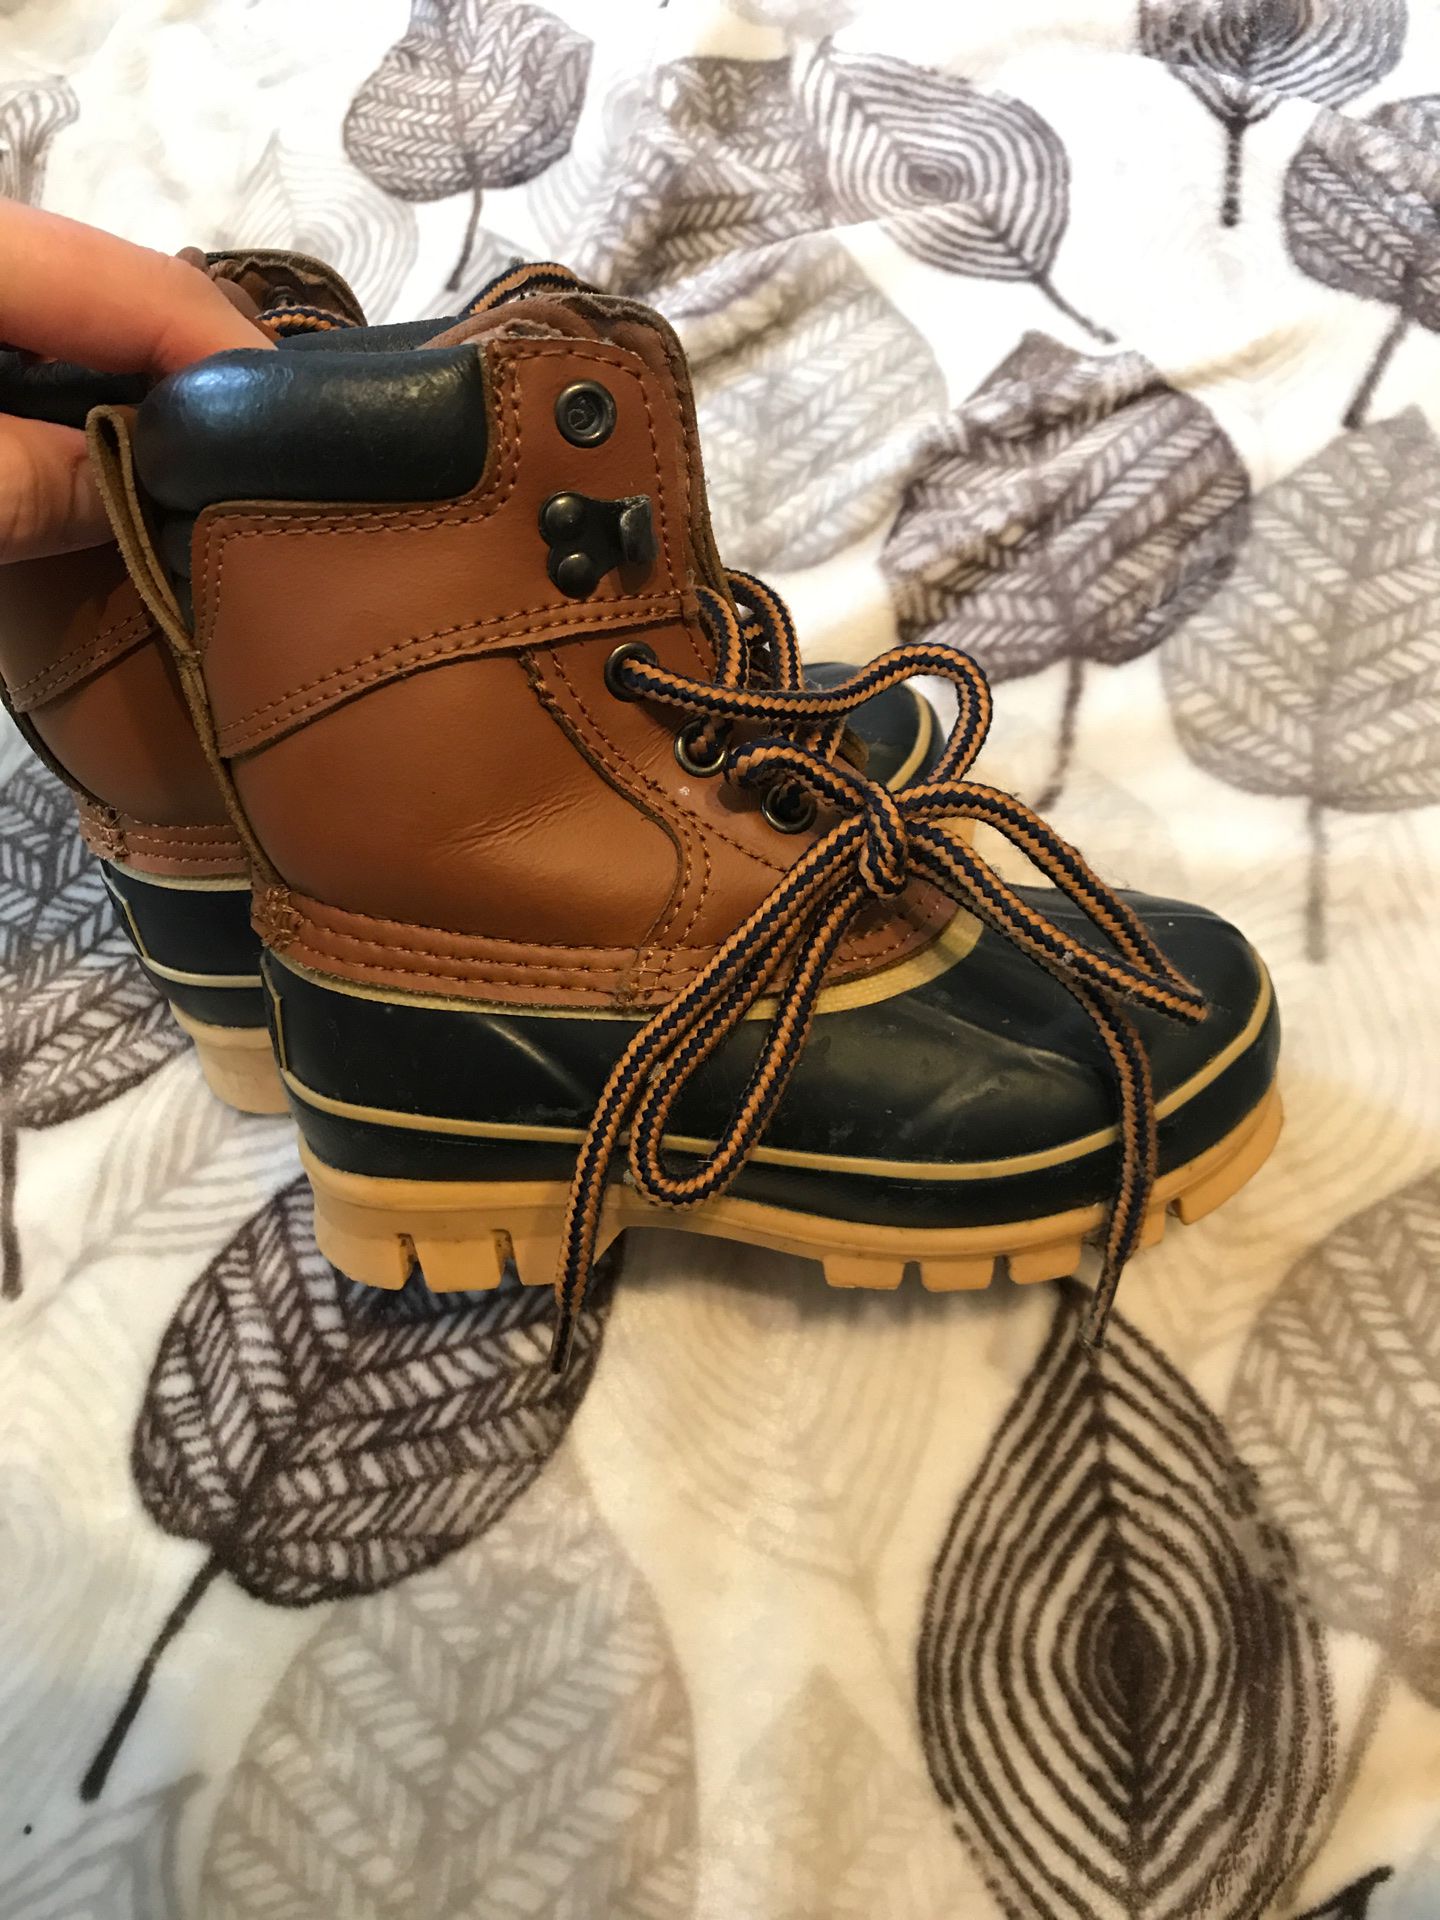 Boys Thermolite boots..size 10